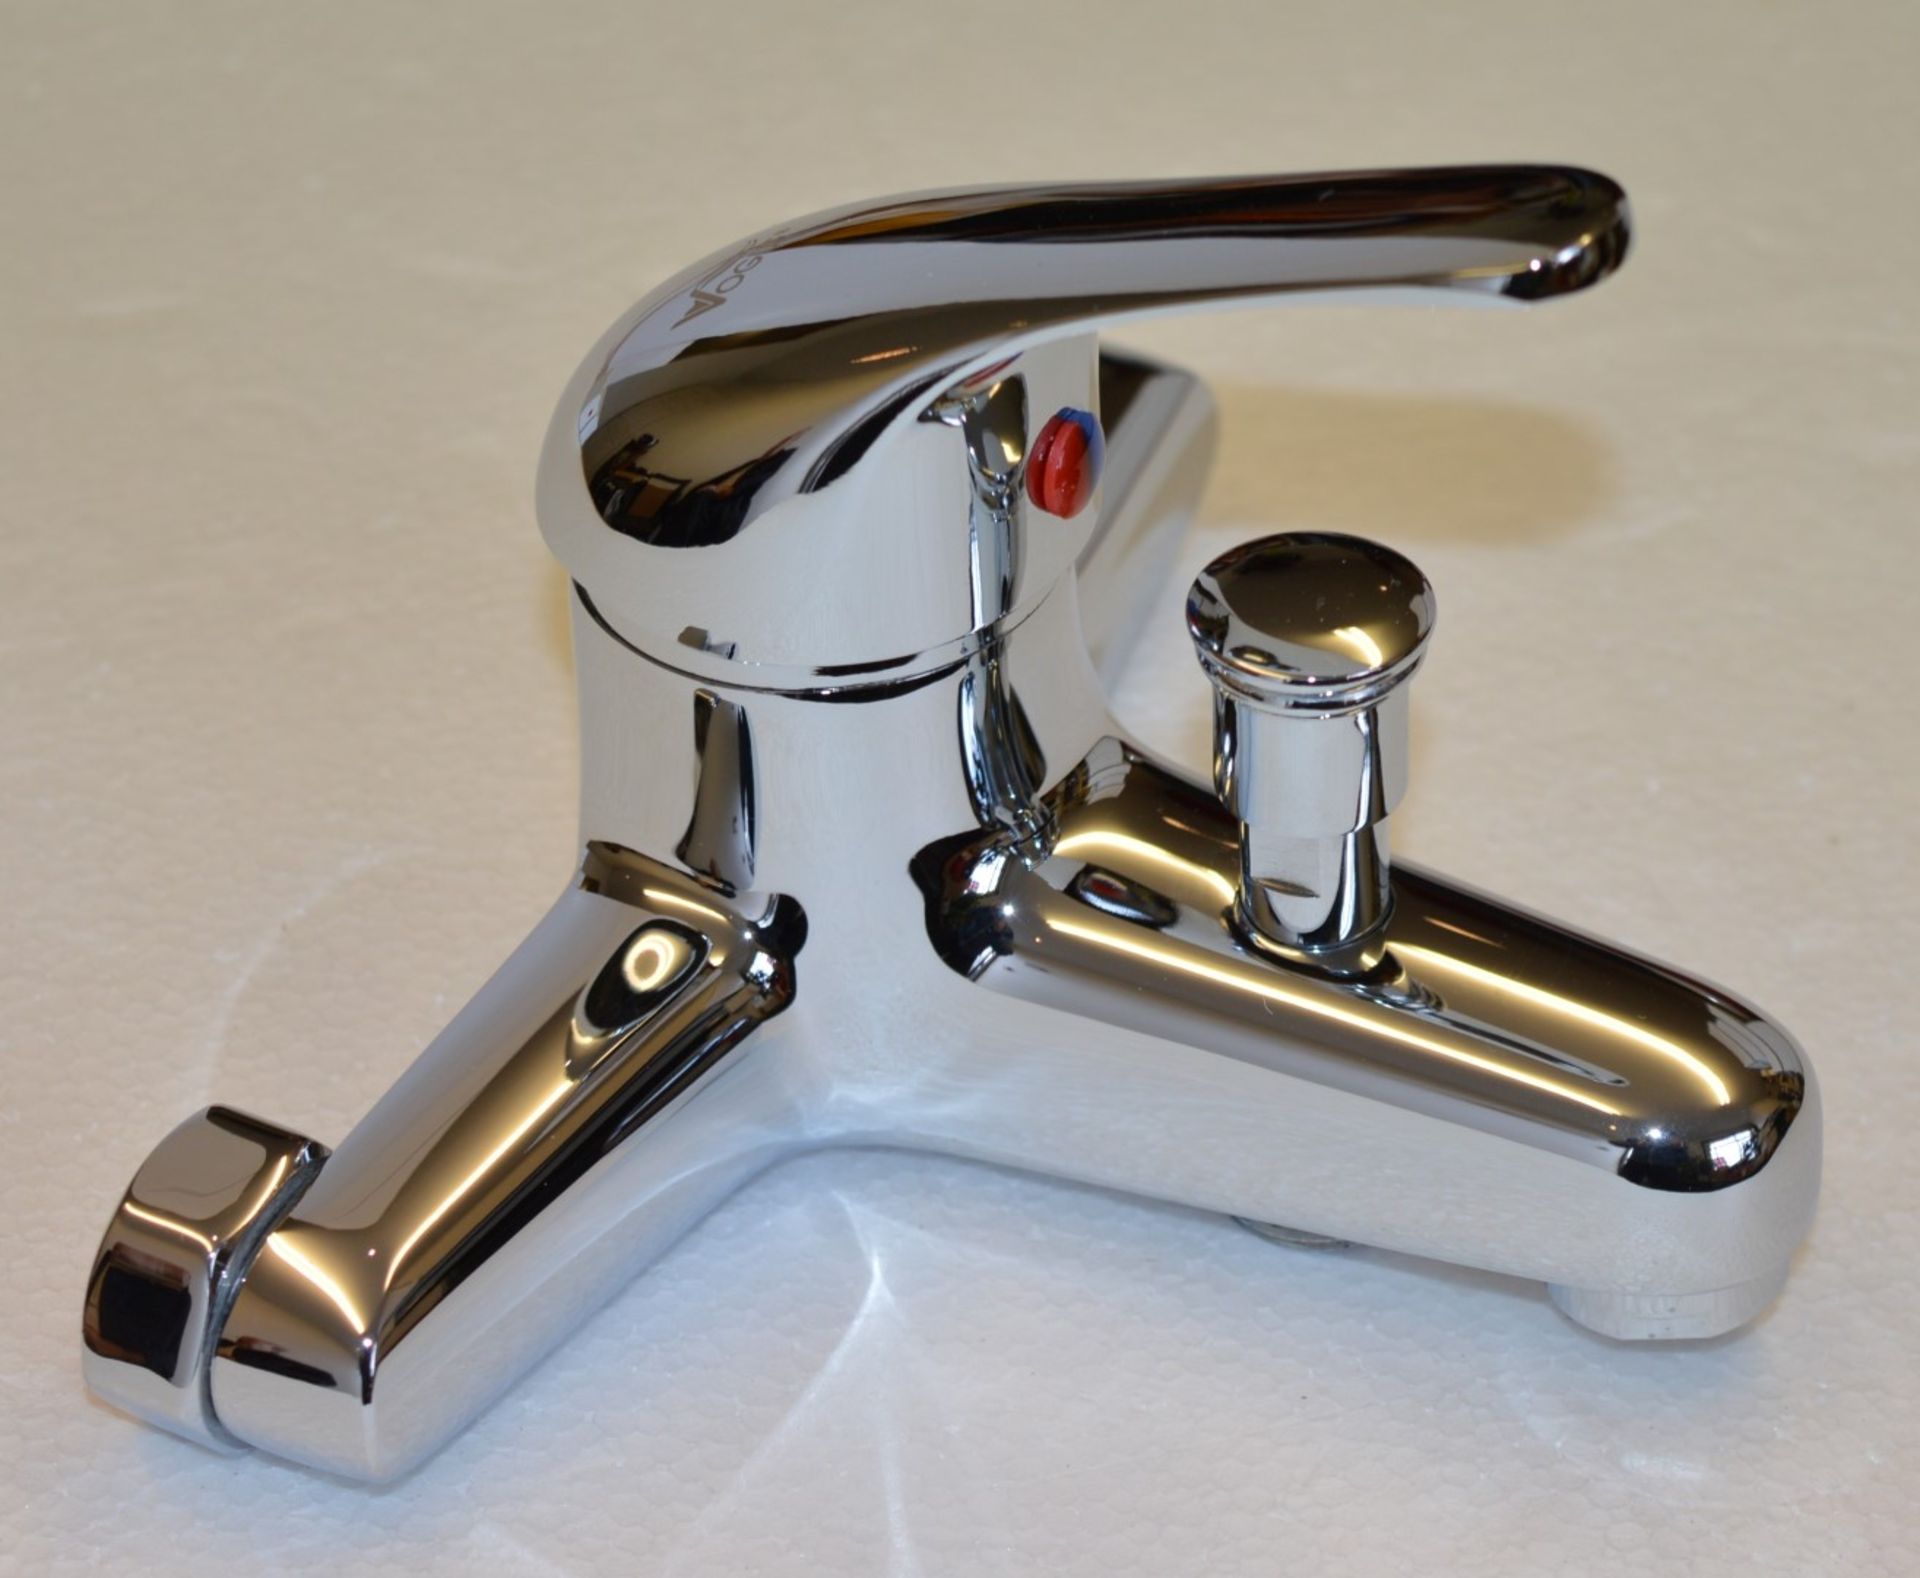 1 x Vogue Carmina Deck Mounted Bath Shower Mixer Tap - Includes Bath Mixer Tap, Shower Head and - Image 7 of 10